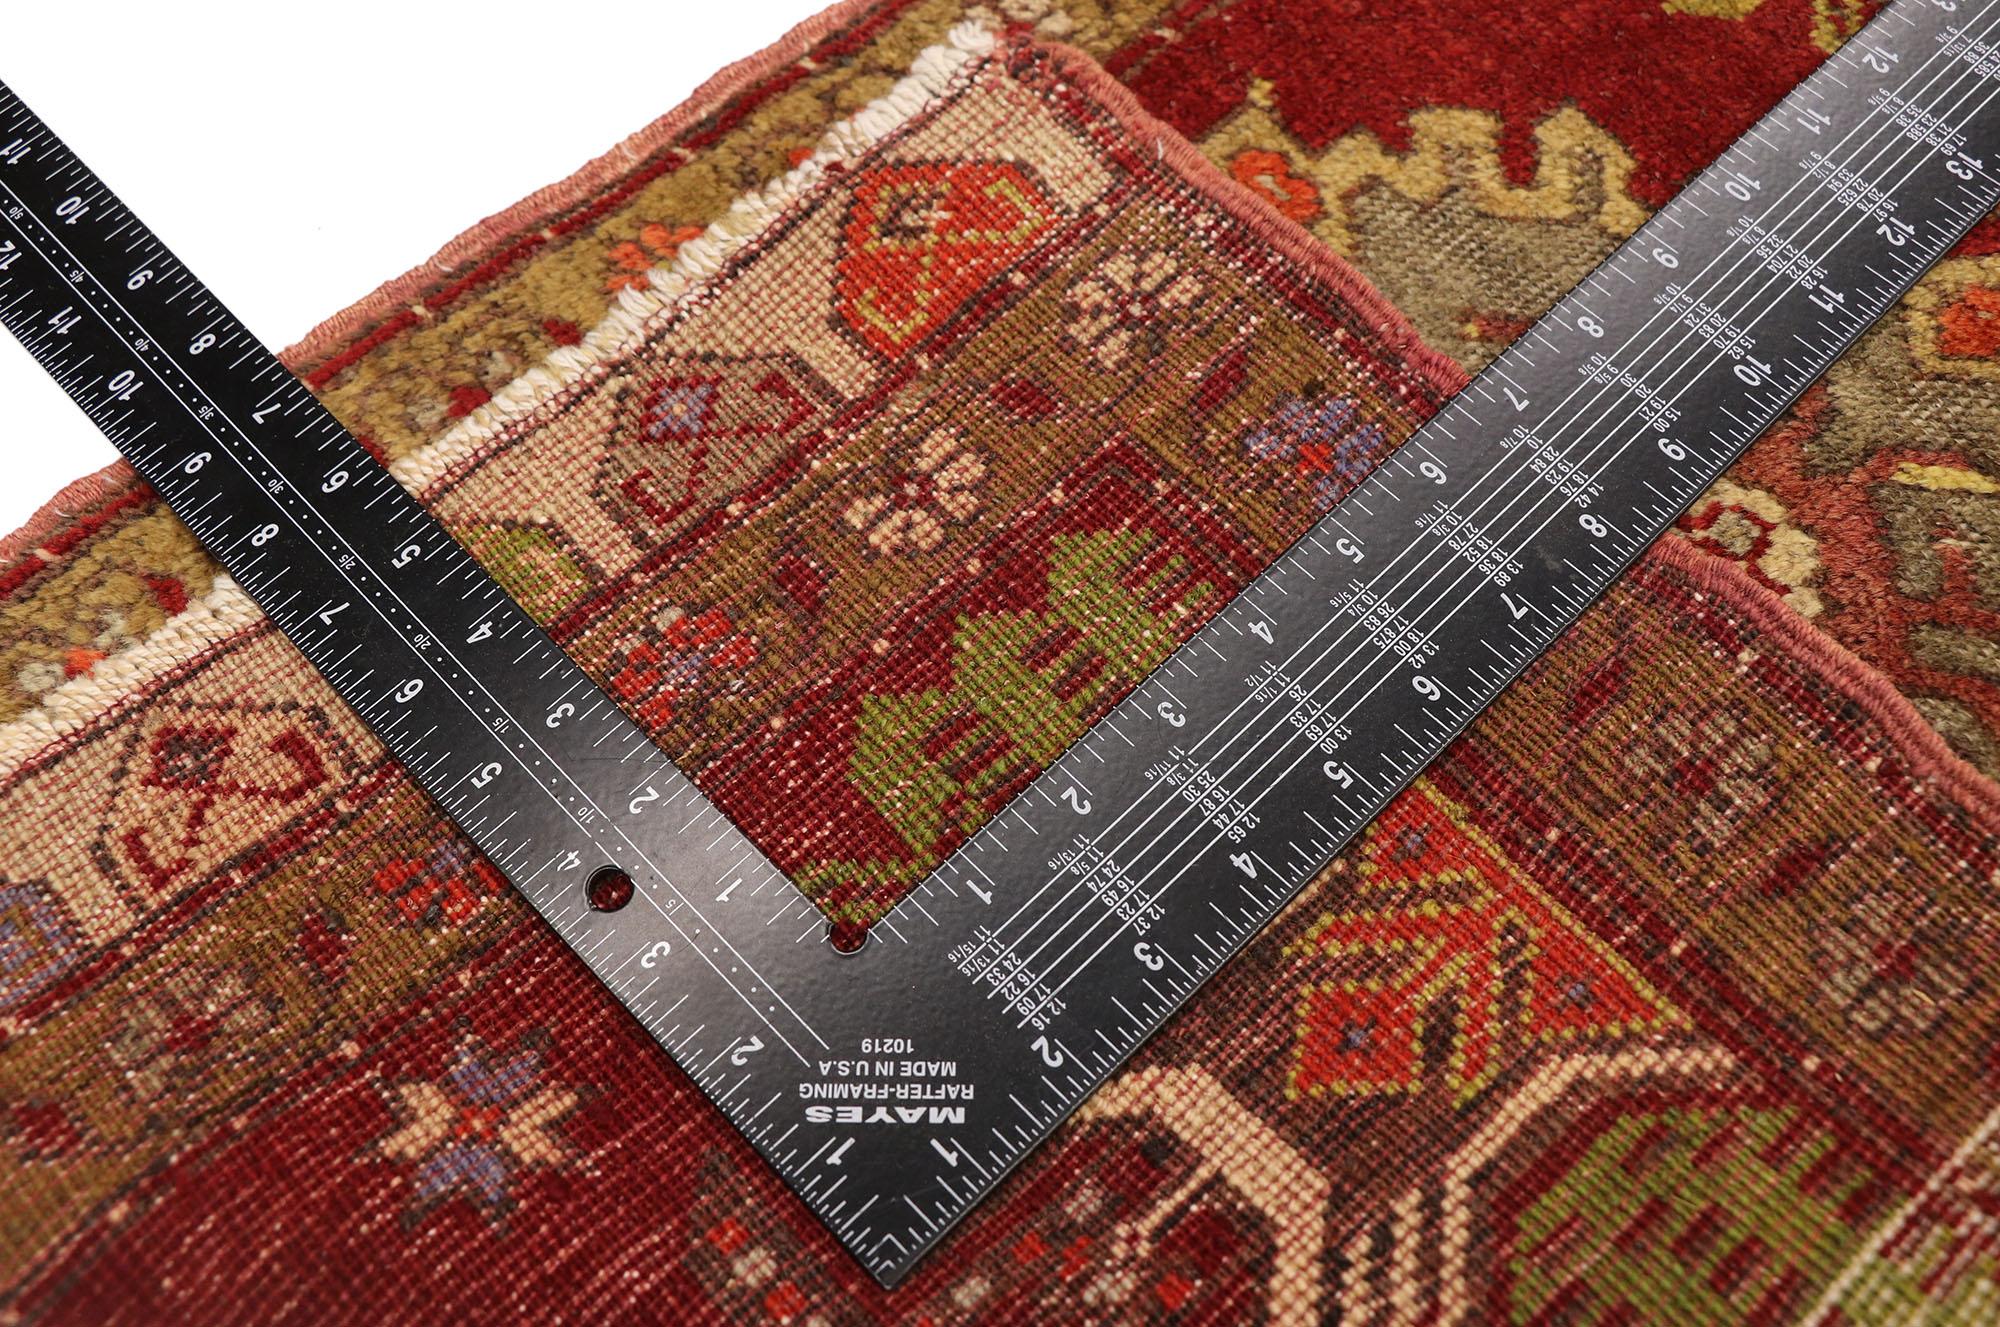 50783  Vintage Turkish Oushak Yastik Scatter Rug, Small Accent Rug. This vintage Turkish Oushak rug features a modern traditional style. Immersed in Anatolian history and refined colors, this vintage Oushak rug combines simplicity with